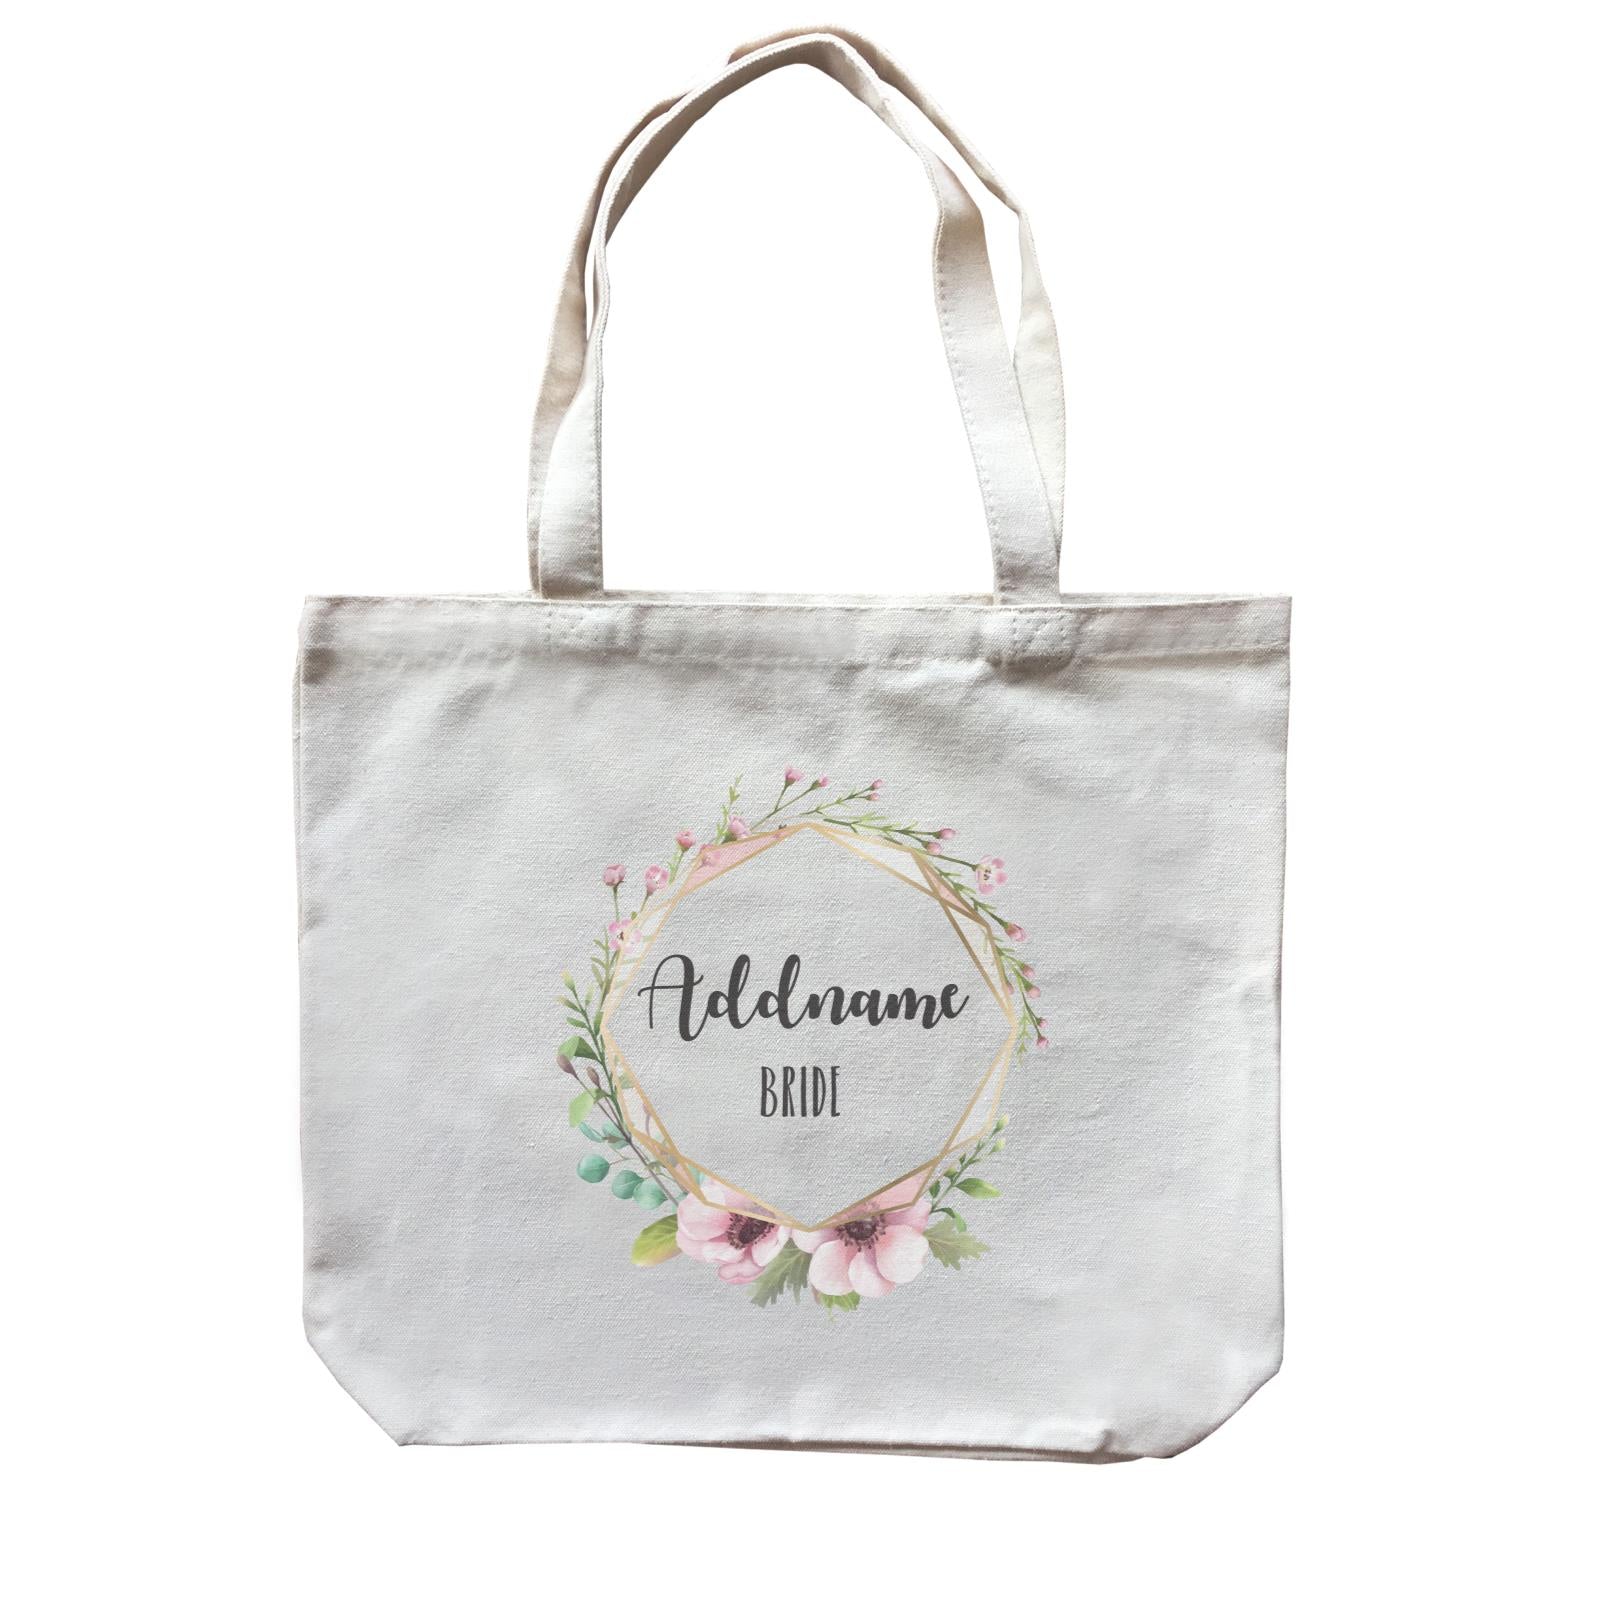 Bridesmaid Floral Modern Pink with Geometric Frame Bride Addname Canvas Bag